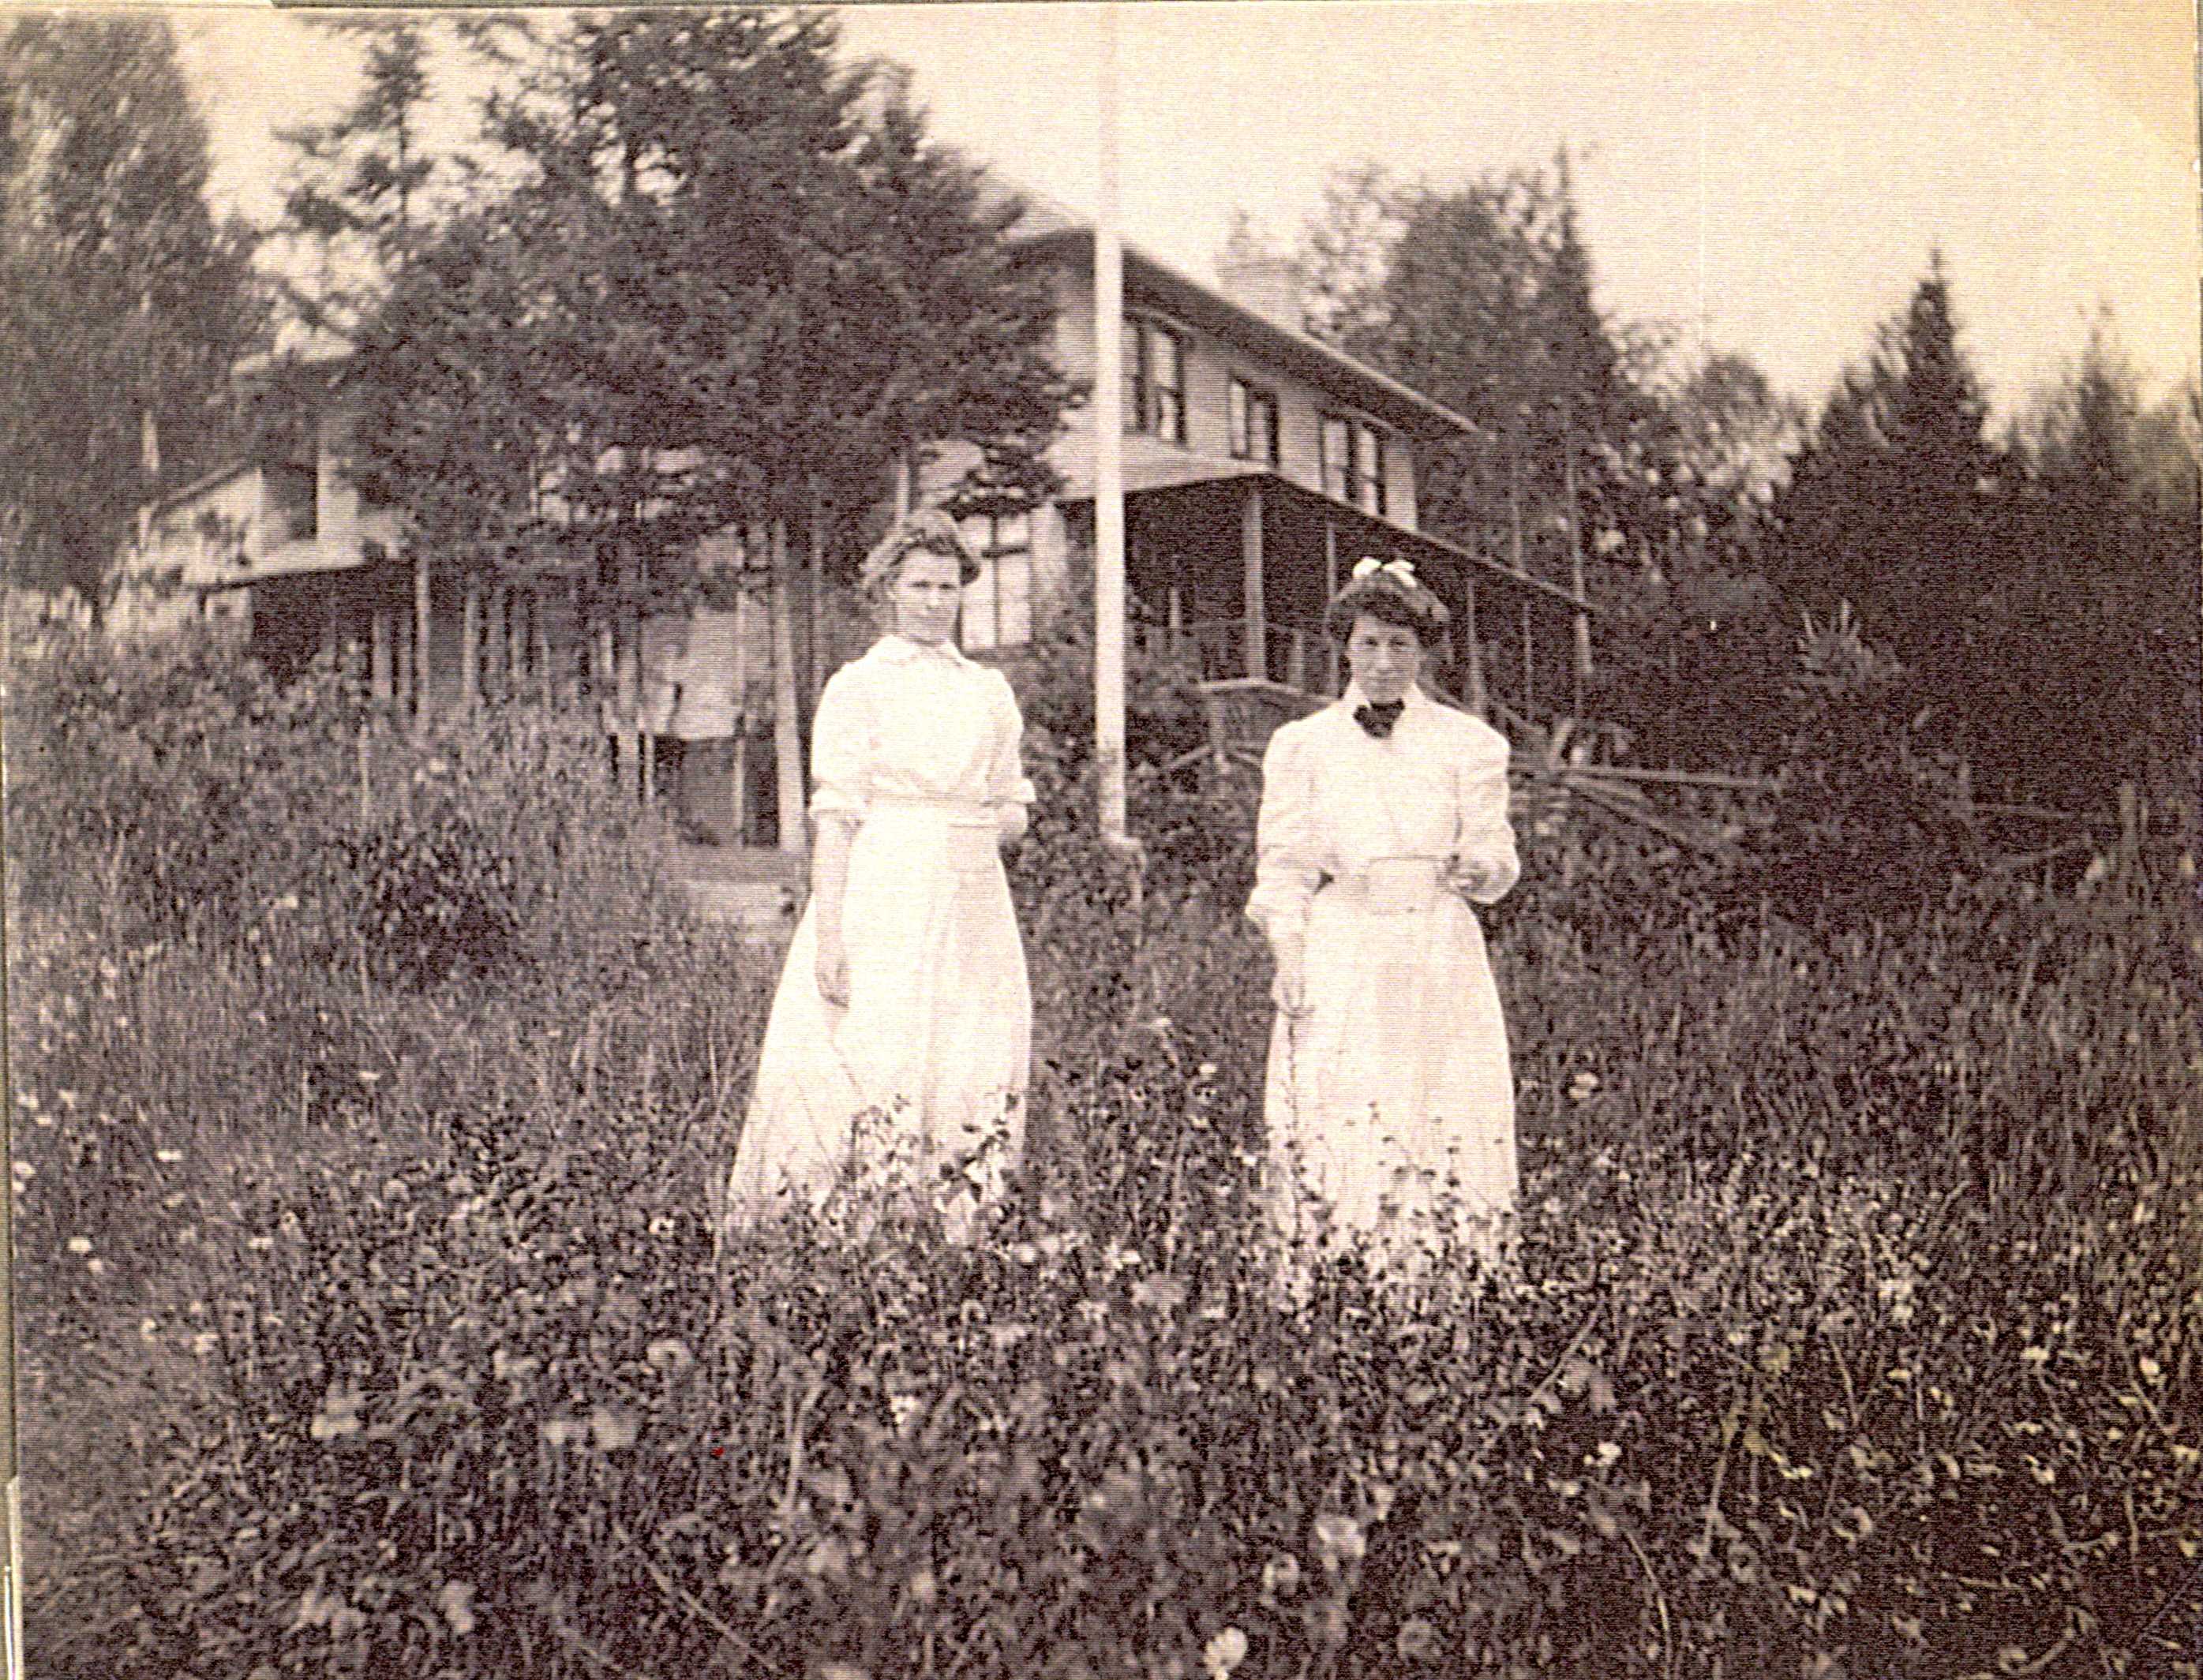 Two young women in dresses posing in a field near a house, each holding a white container.